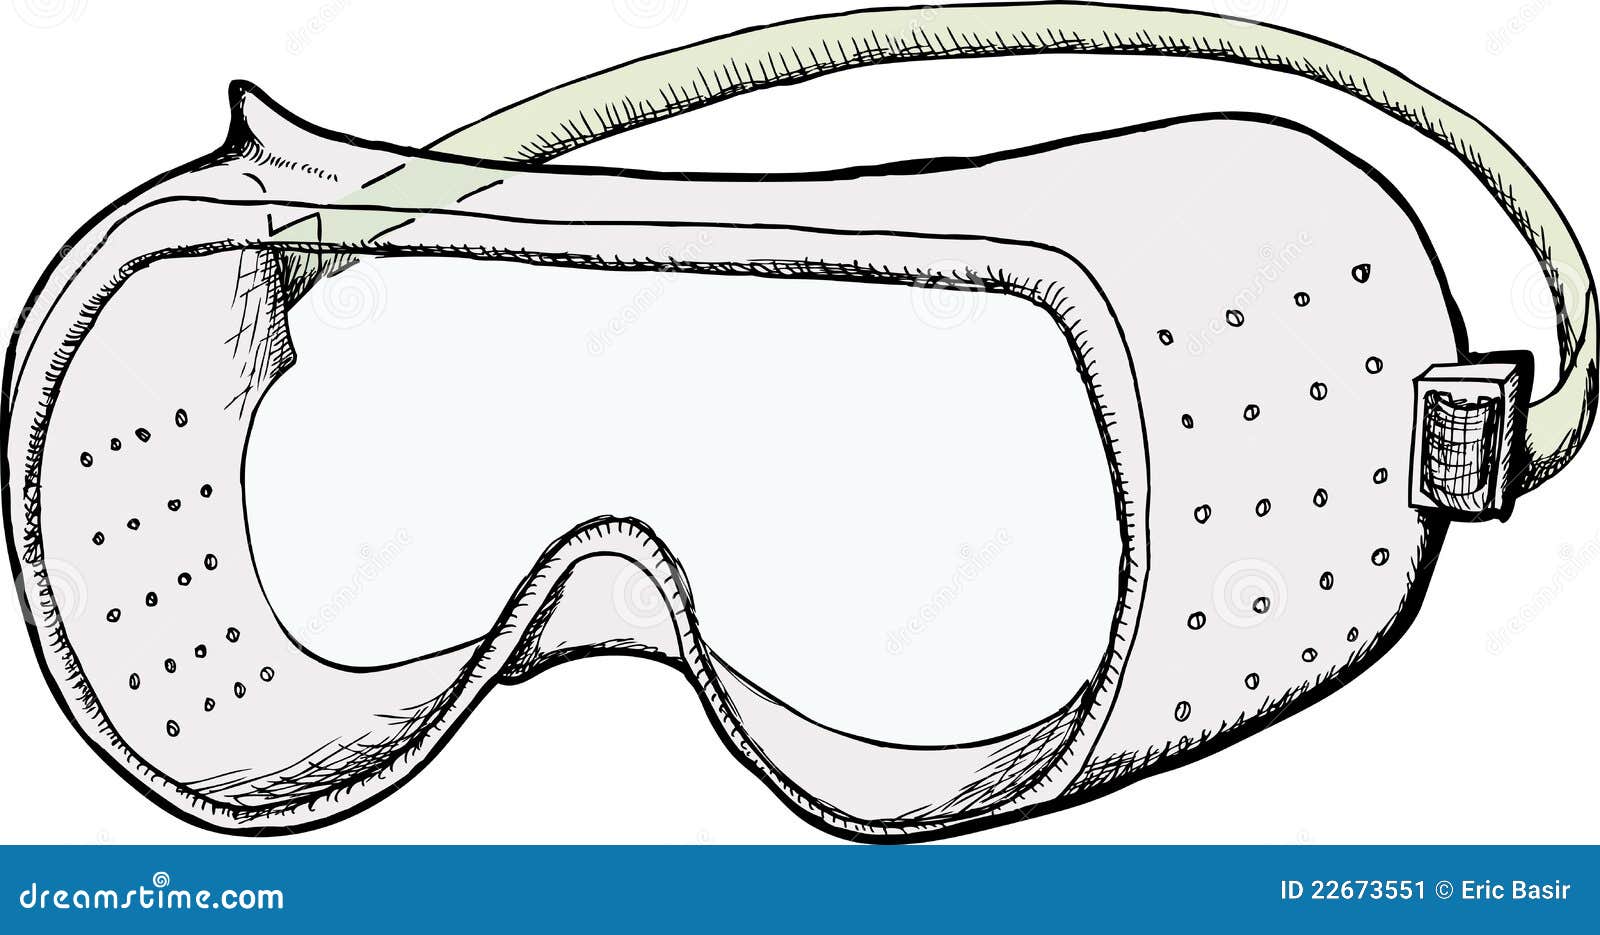 safety goggles clipart - photo #31